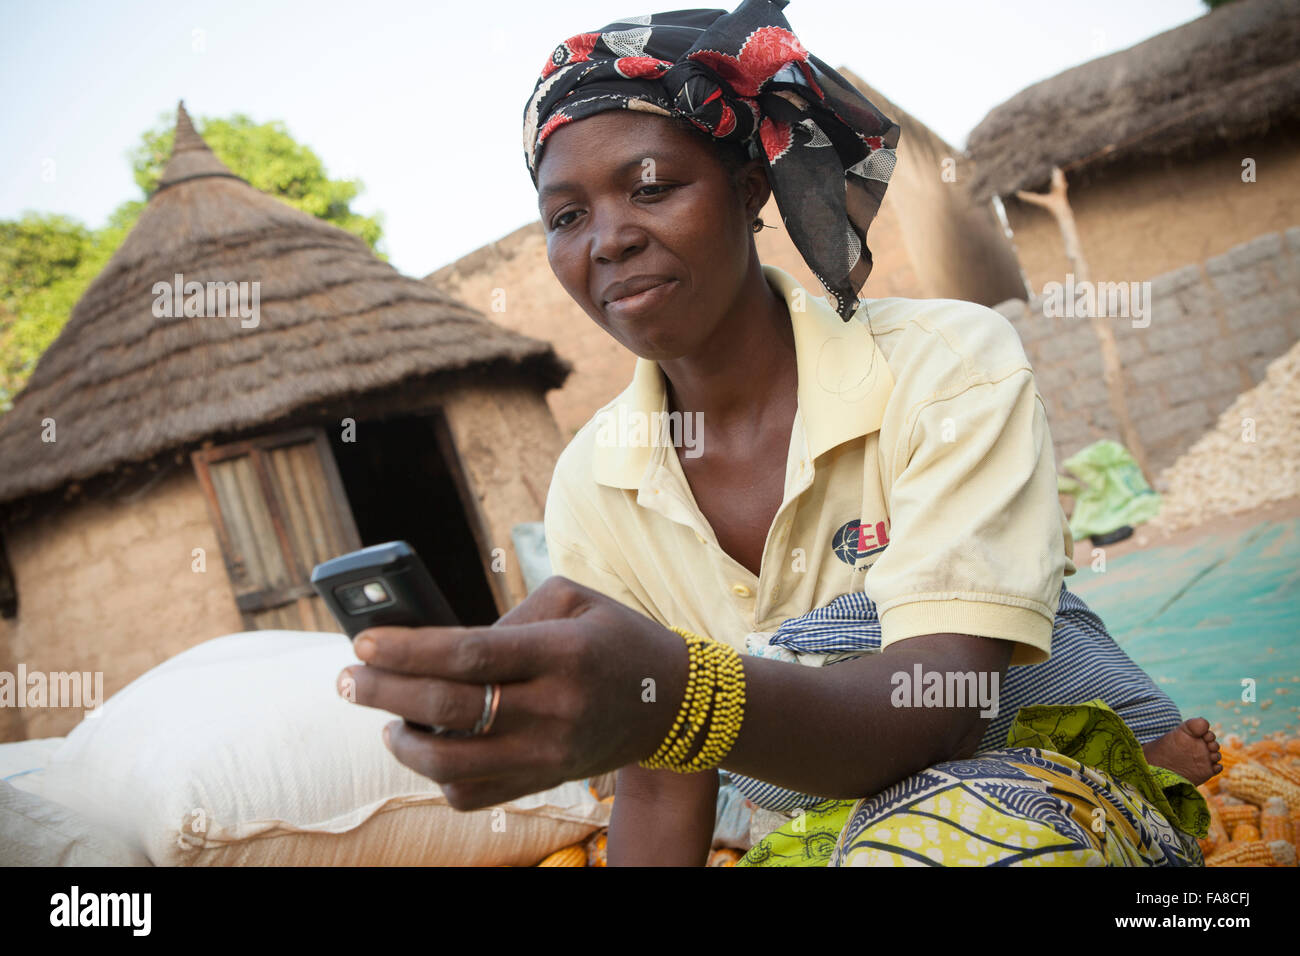 A farmer uses mobile phone technology to compare prices at various markets within Banfora Department, Burkina Faso, West Africa. Stock Photo